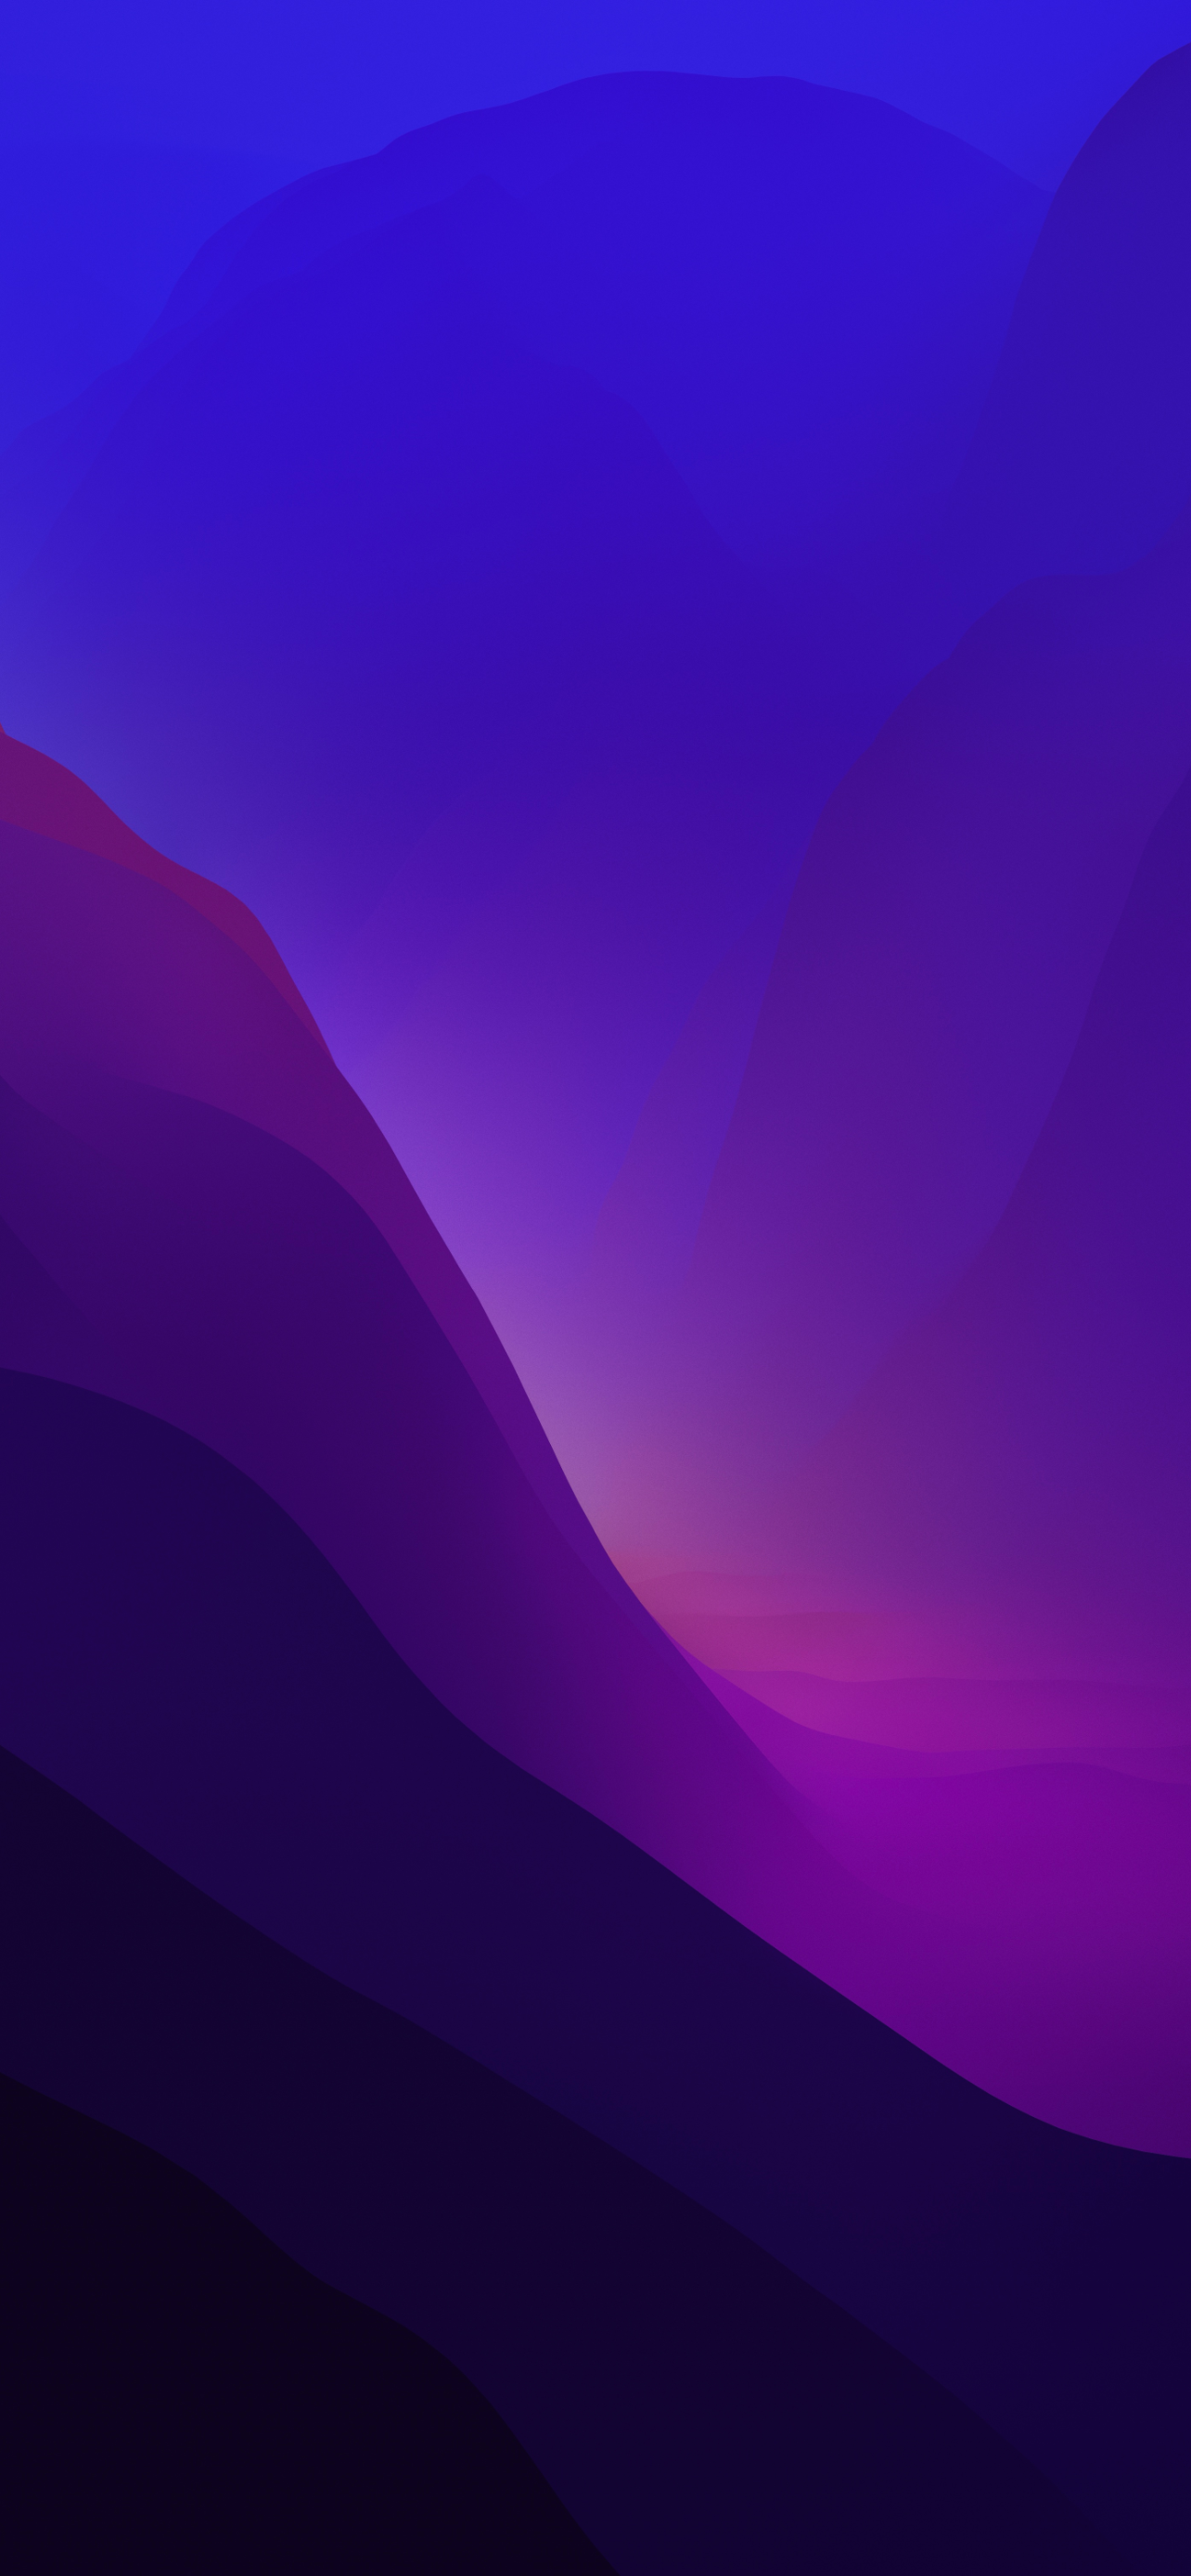 MacOS Big Sur Light for Widgets by AR7 iPhone 11 Wallpapers Free Download